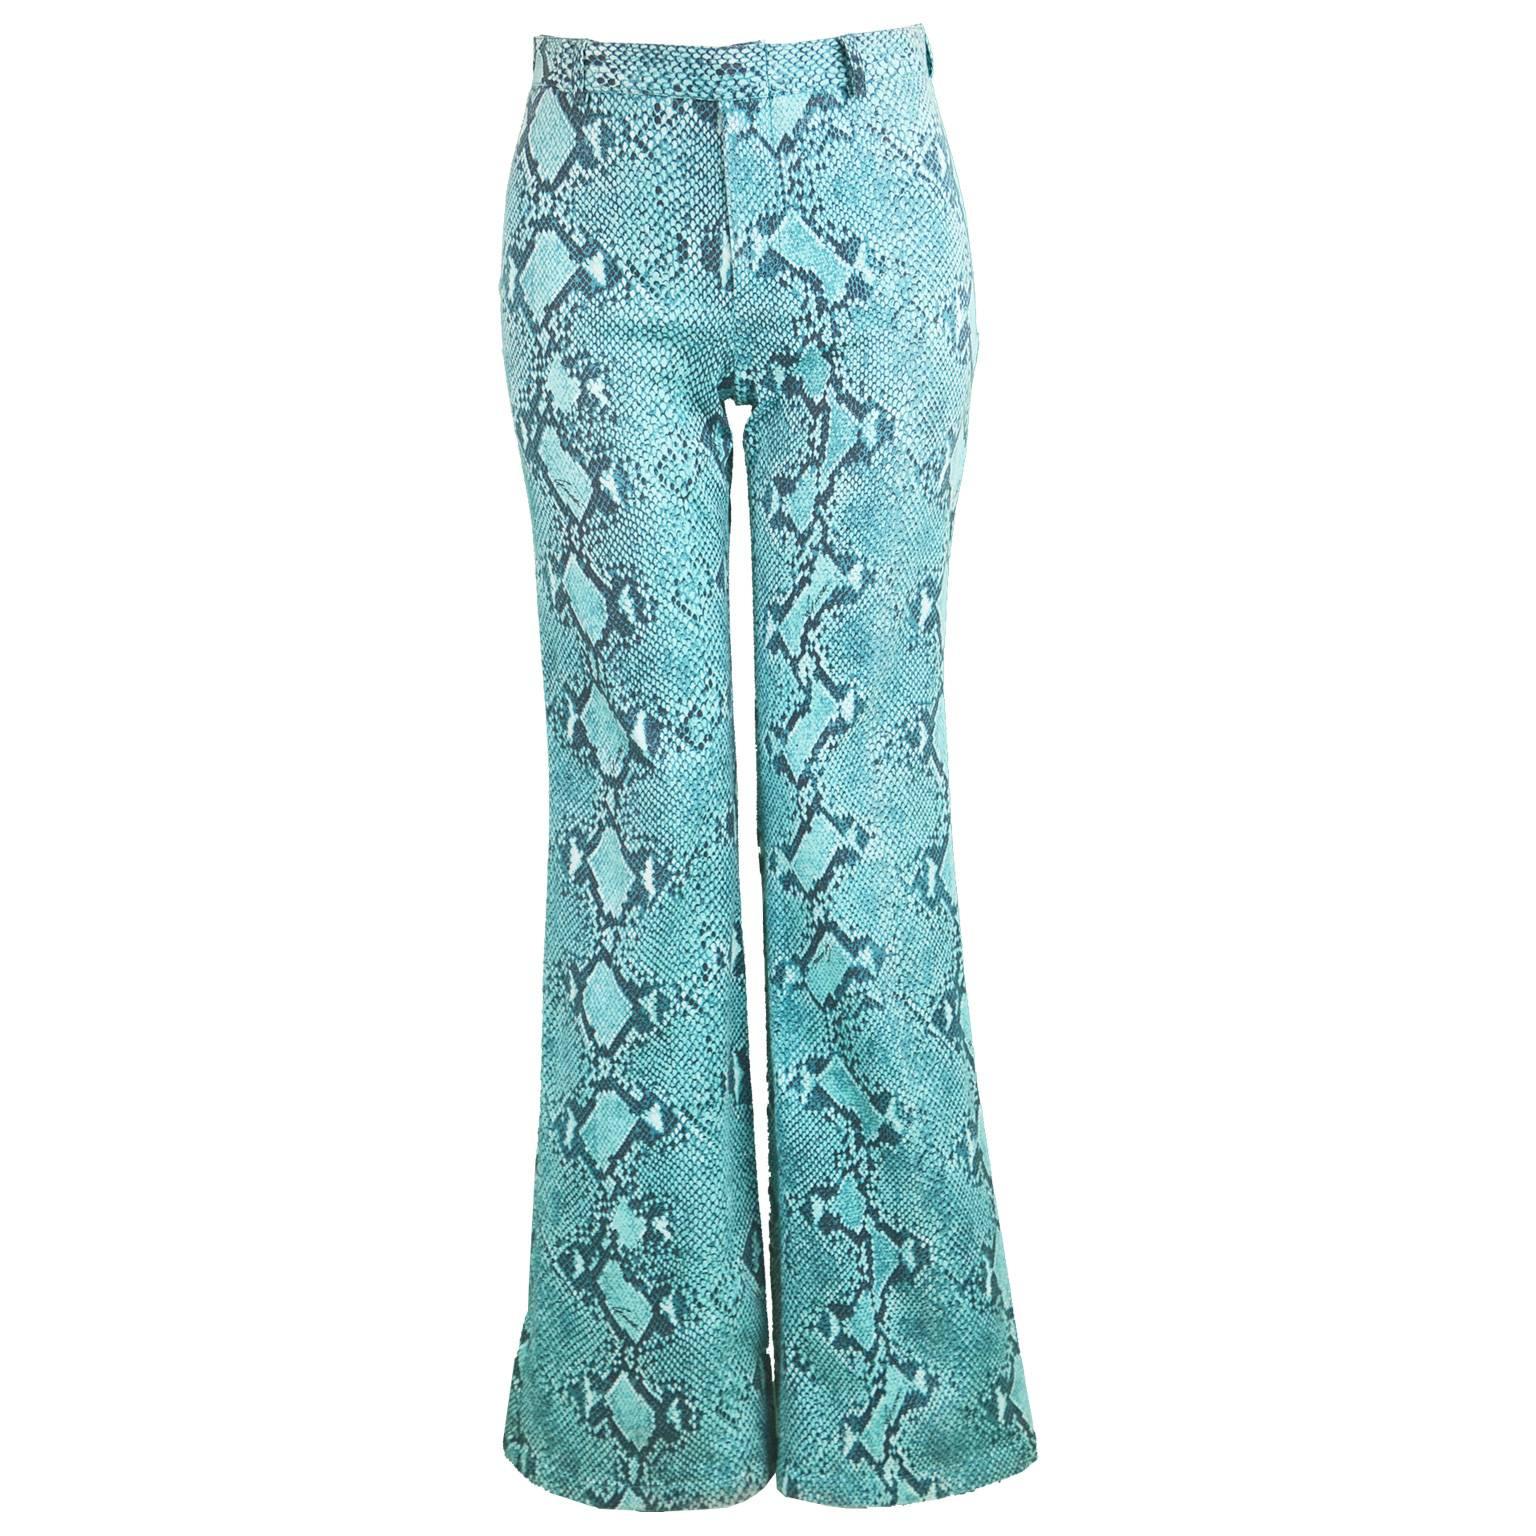 Tom Ford for Gucci Blue Cotton Snakeskin Print Flared Pants, Spring 2000 For Sale